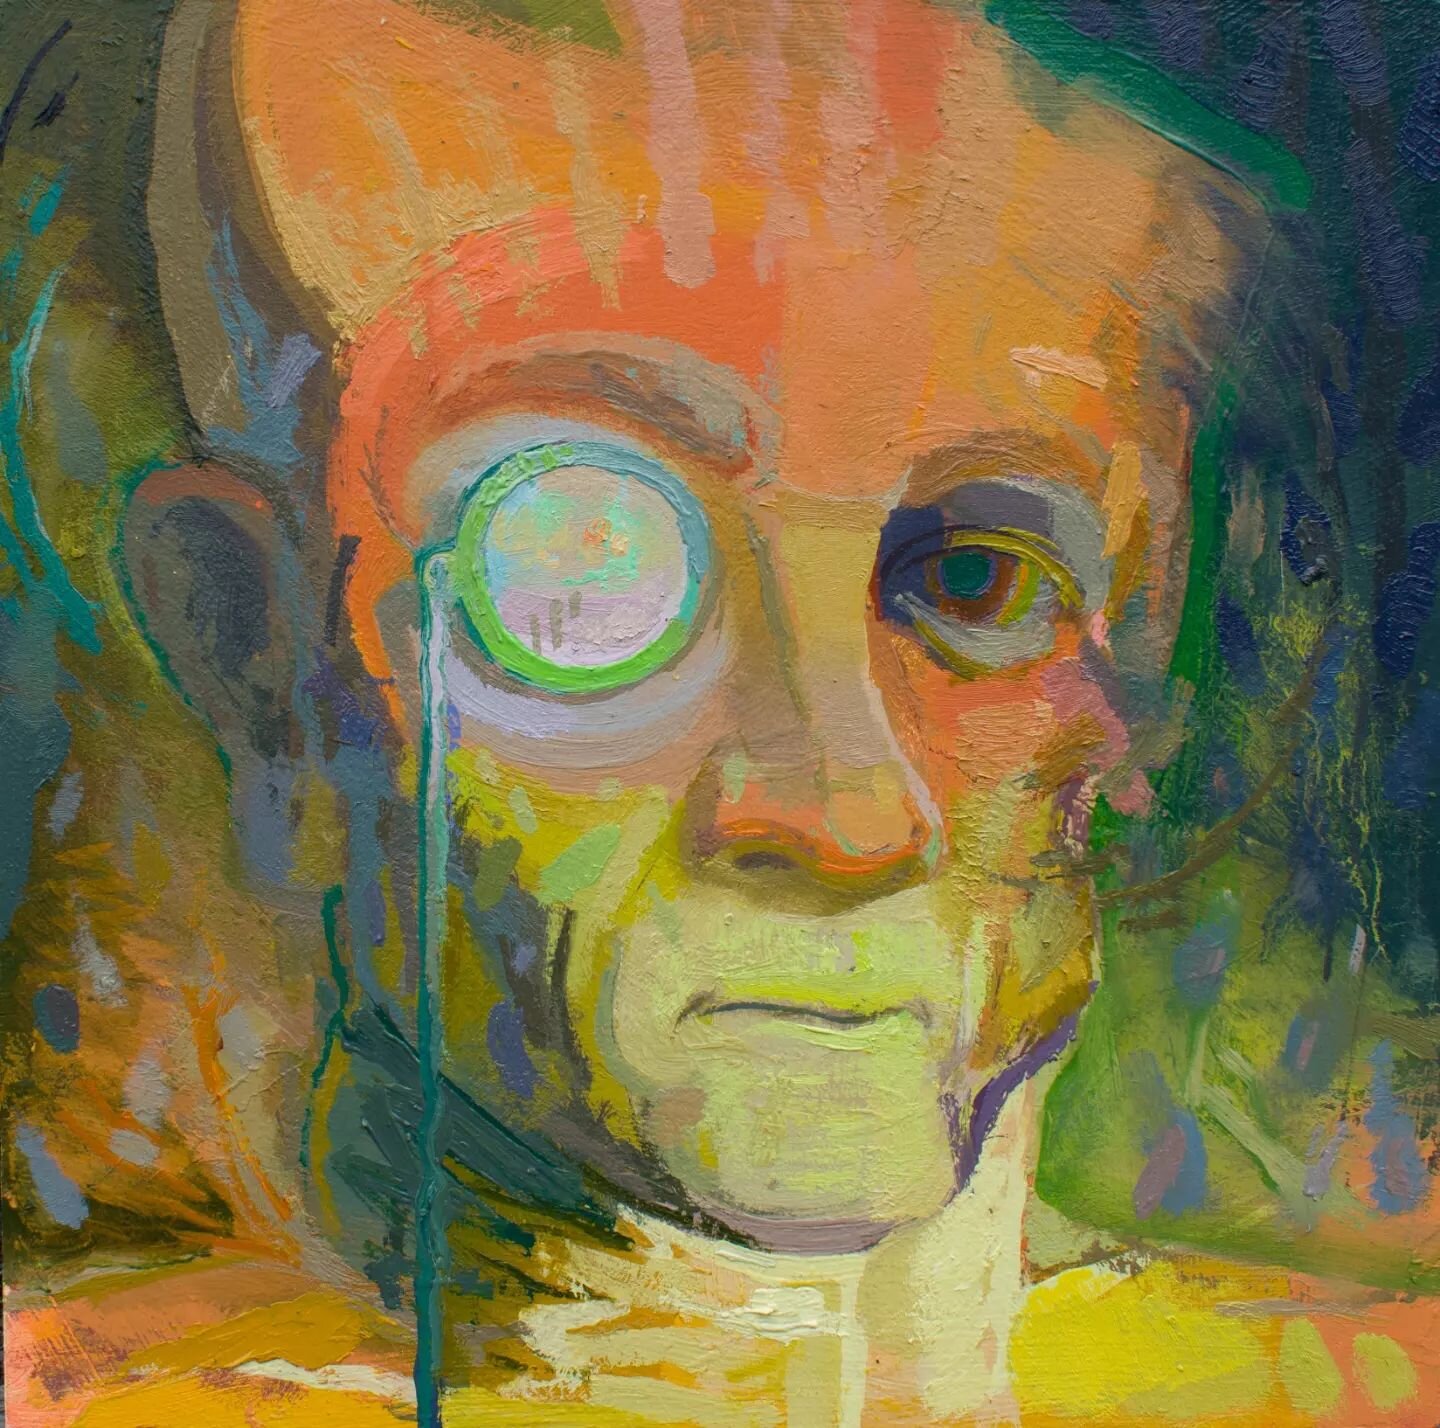 Dr. Lunar Mage
Oil on board
9&quot; x 9&quot;
2022
$150

A scholarly mage from the dark side of the moon, keeping guard. 

Revisiting a painting motif from Mythos + Hue. I've been letting a piece evolve and each step it feels like I develop the exten